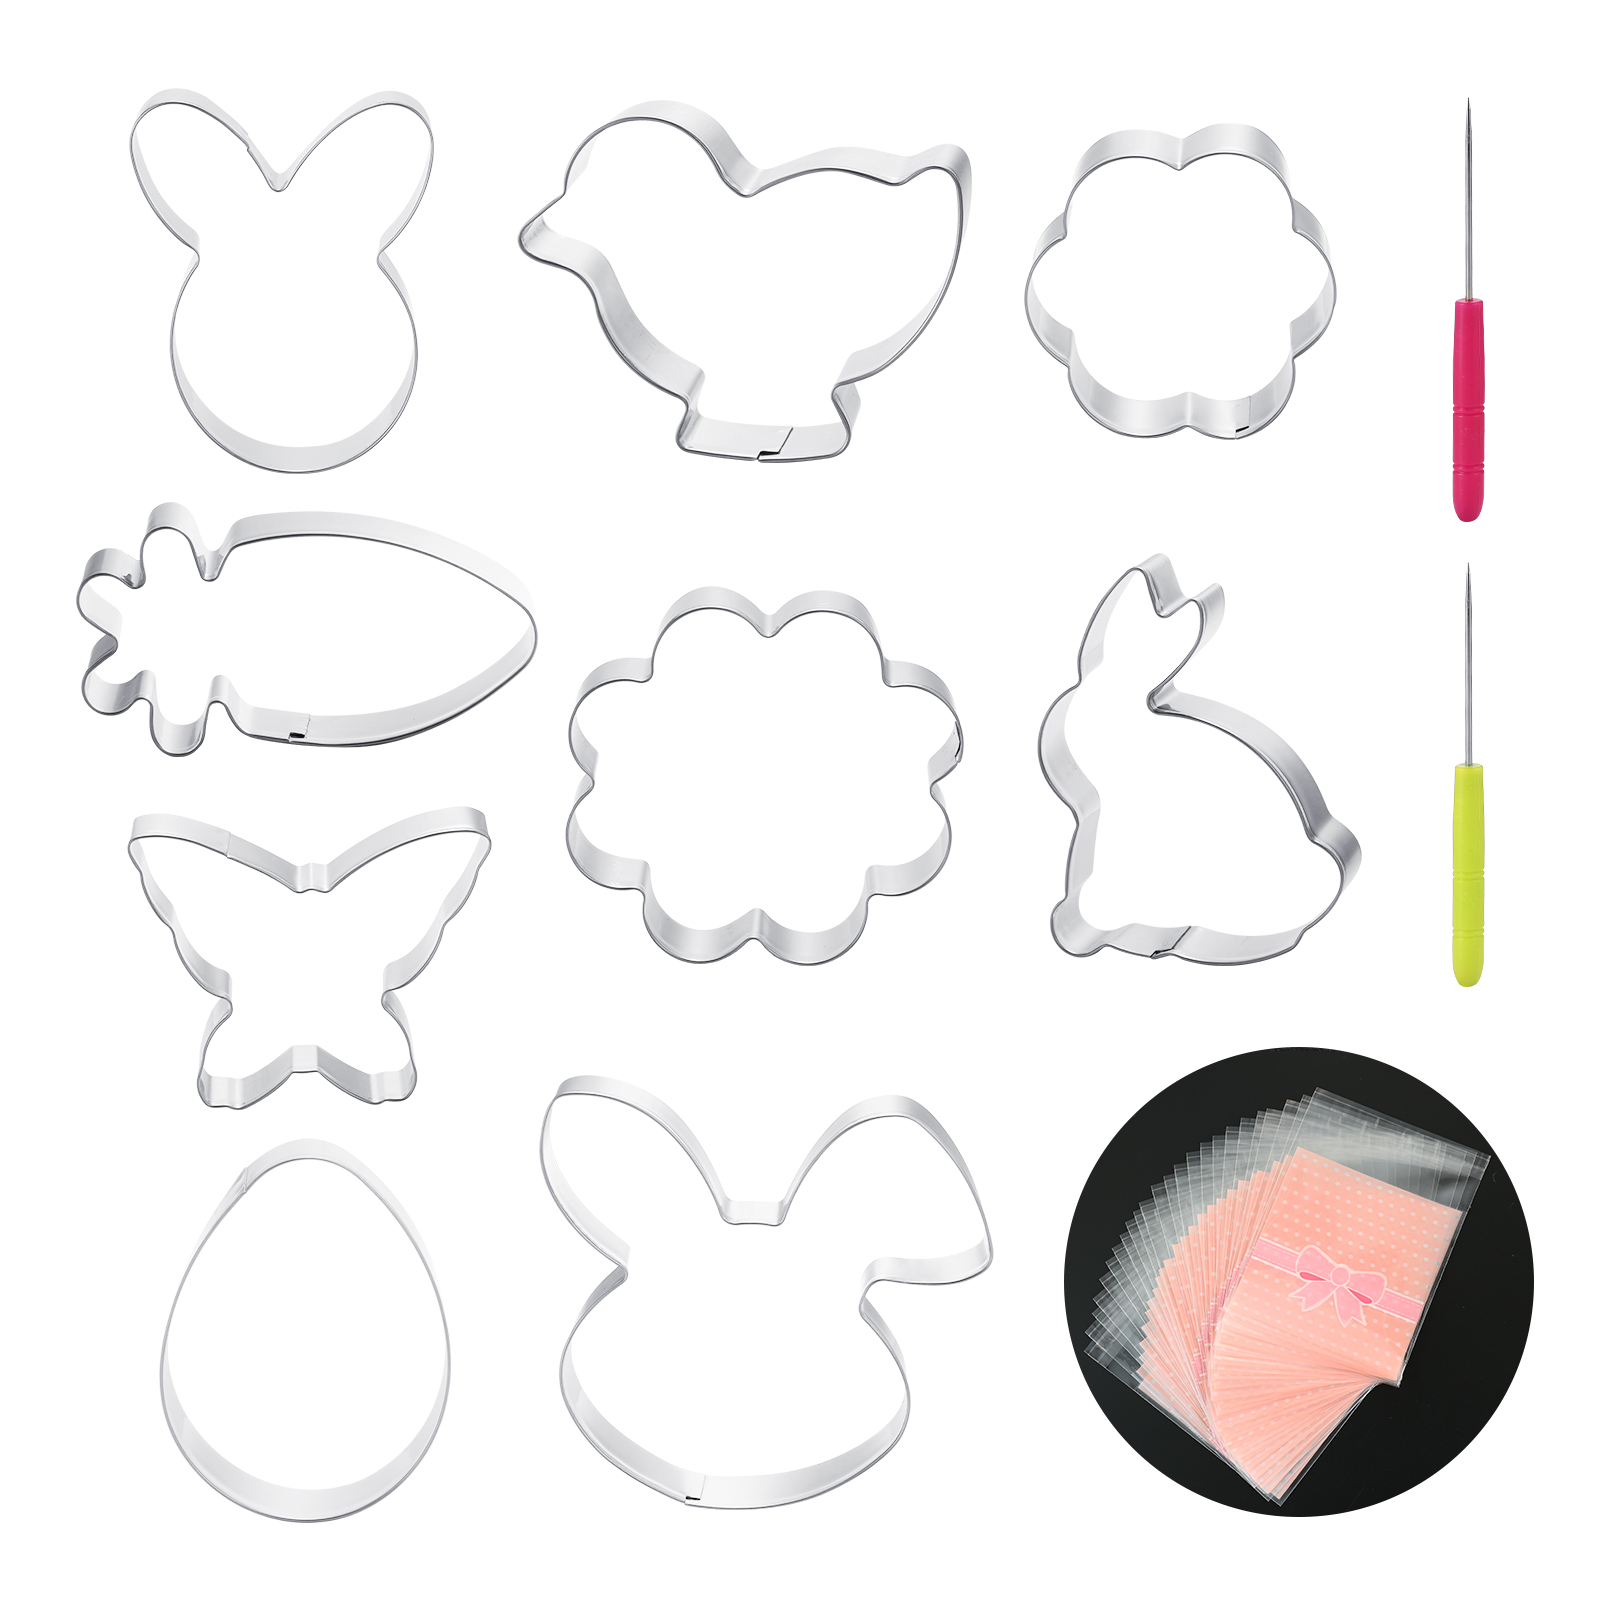 Kasmoire Cookie Cutters ,9-Piece Easter Cookie Cutter Set with Sugar Stir Needle